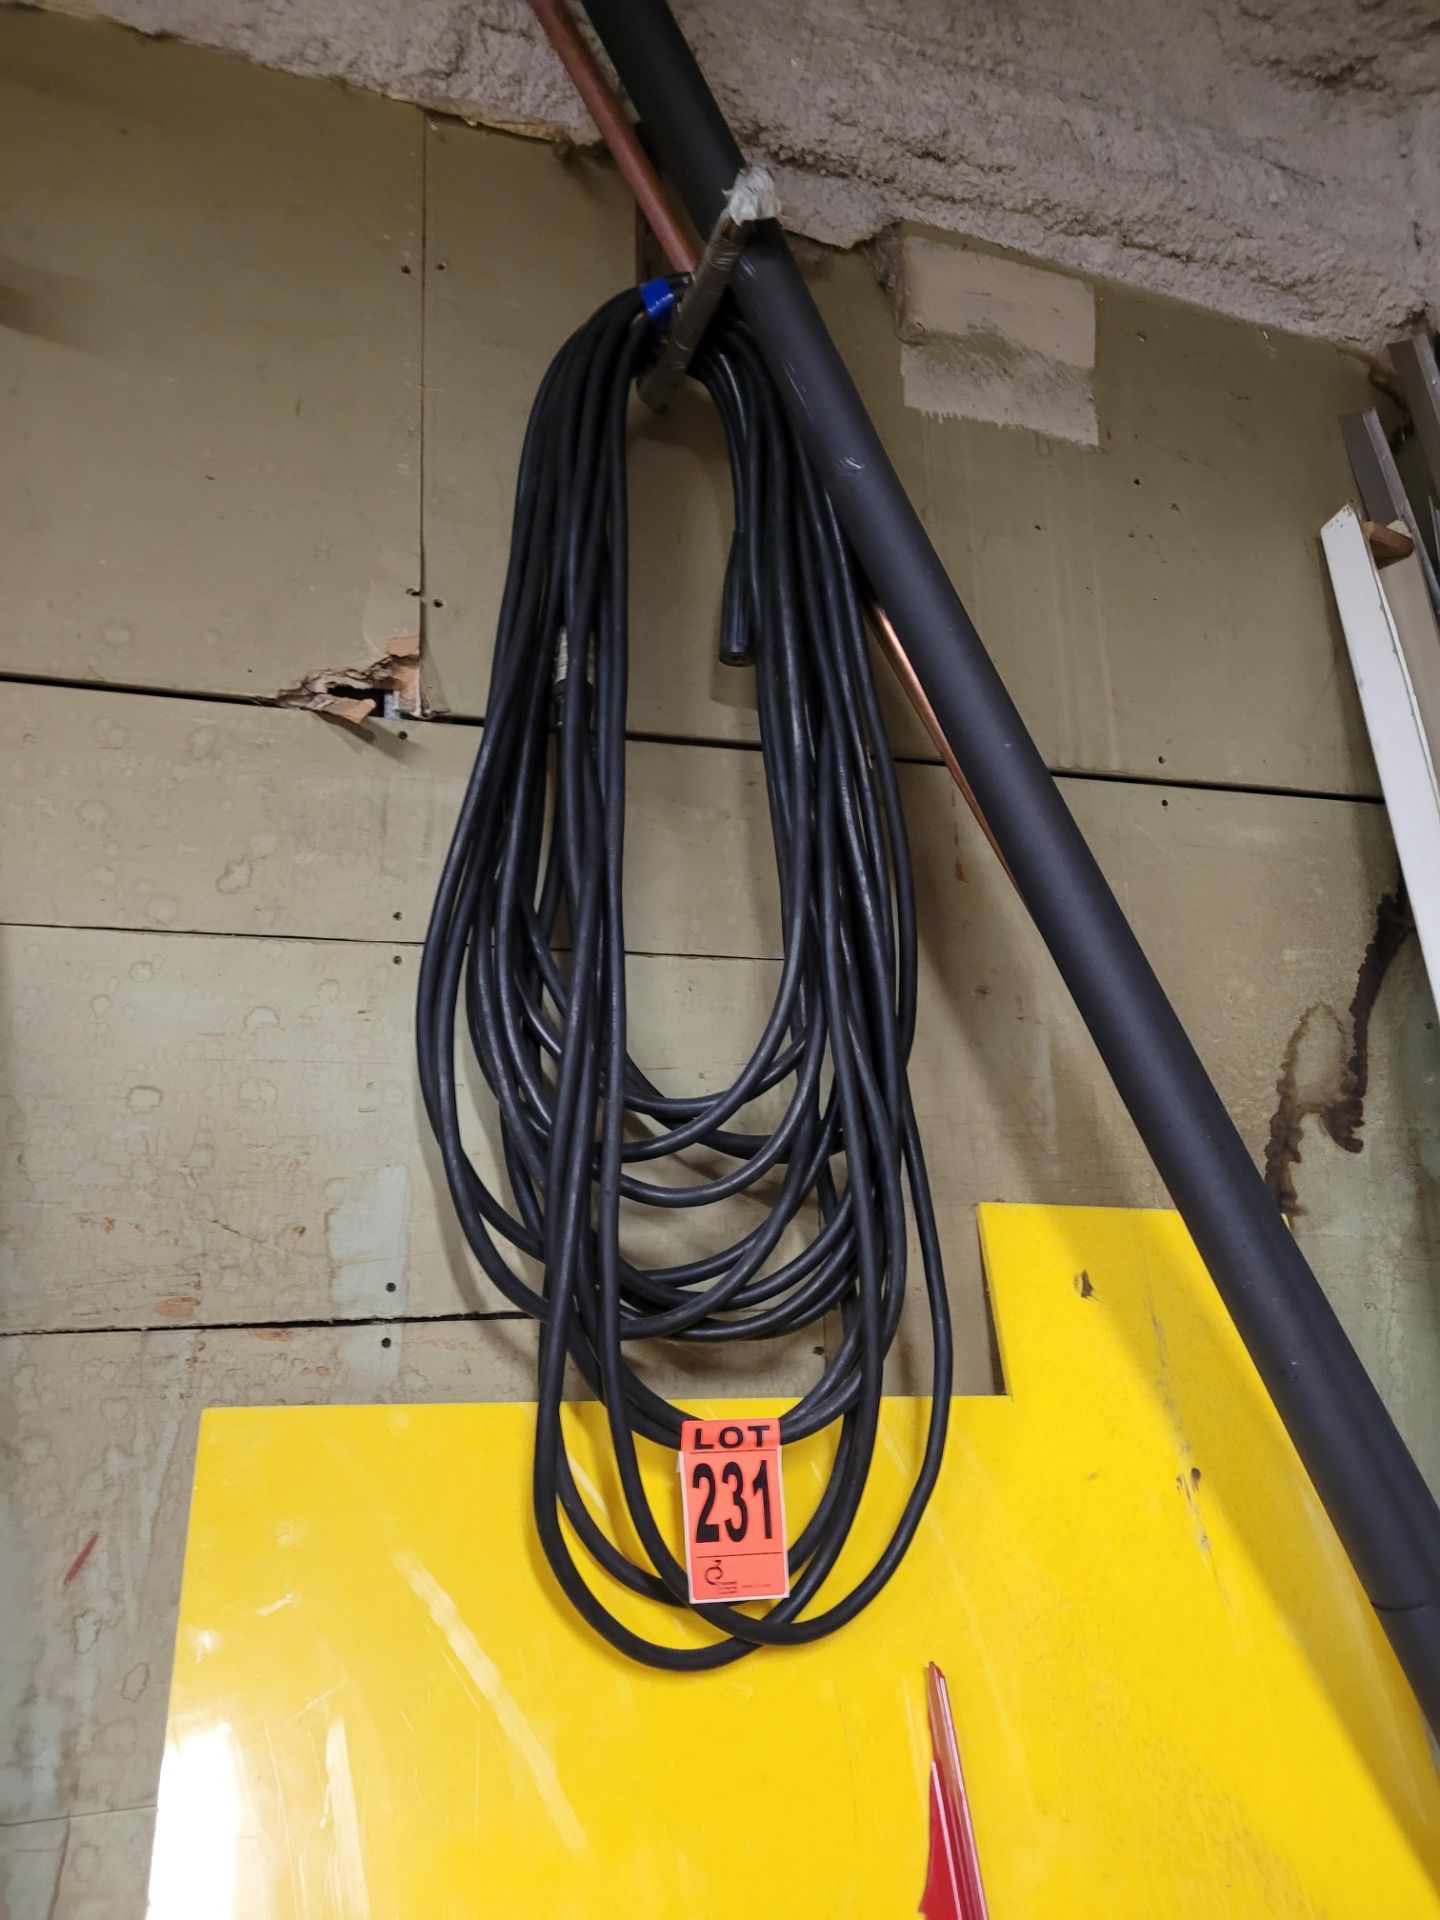 Lot of welding accessories, cable